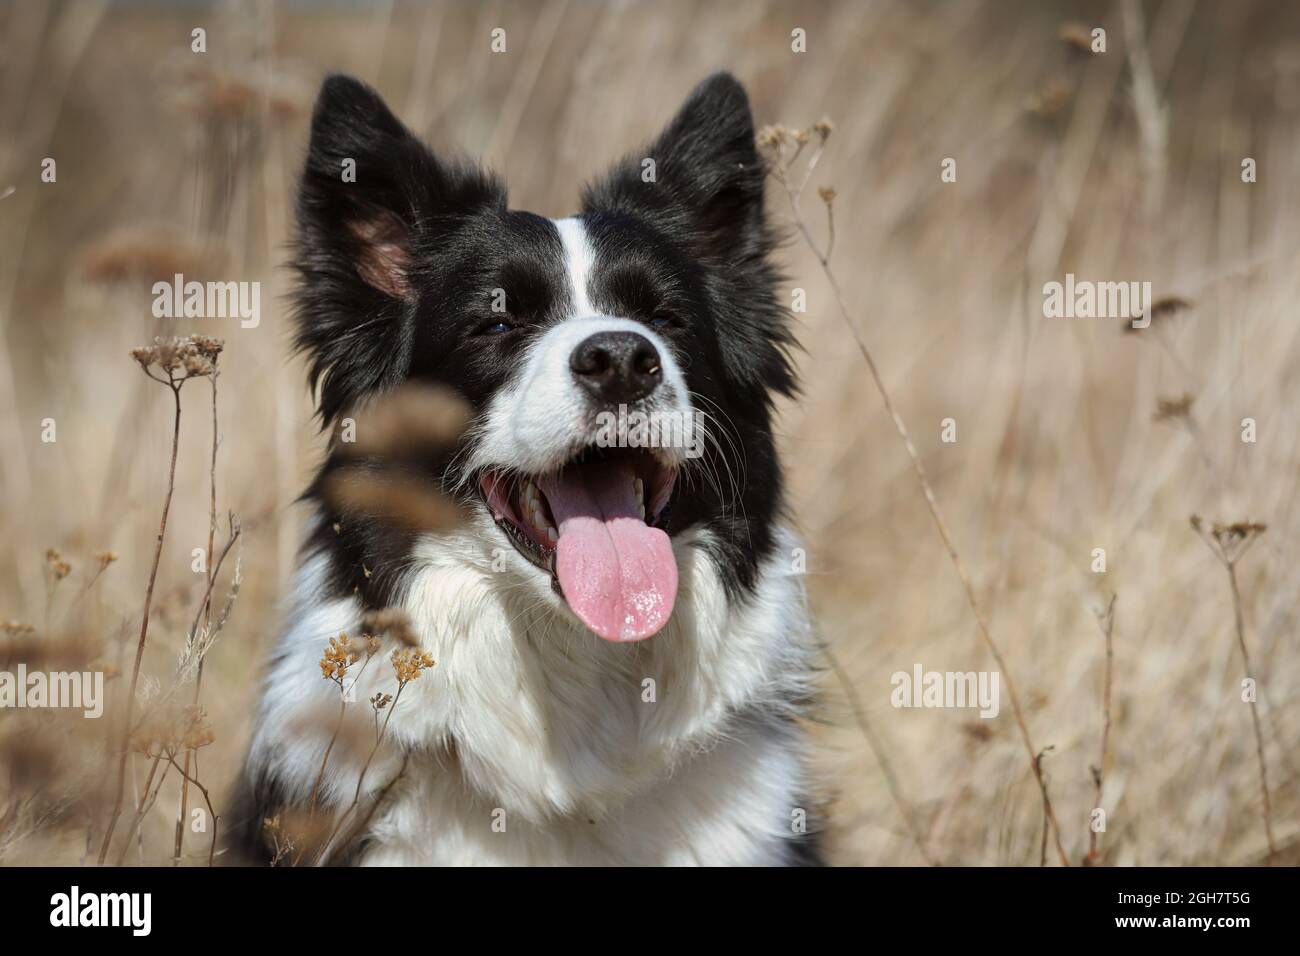 Cute Portrait of Smiling Border Collie with Tongue Out in the Field. Adorable Black and White Dog Head in Summer Sunny Nature. Stock Photo